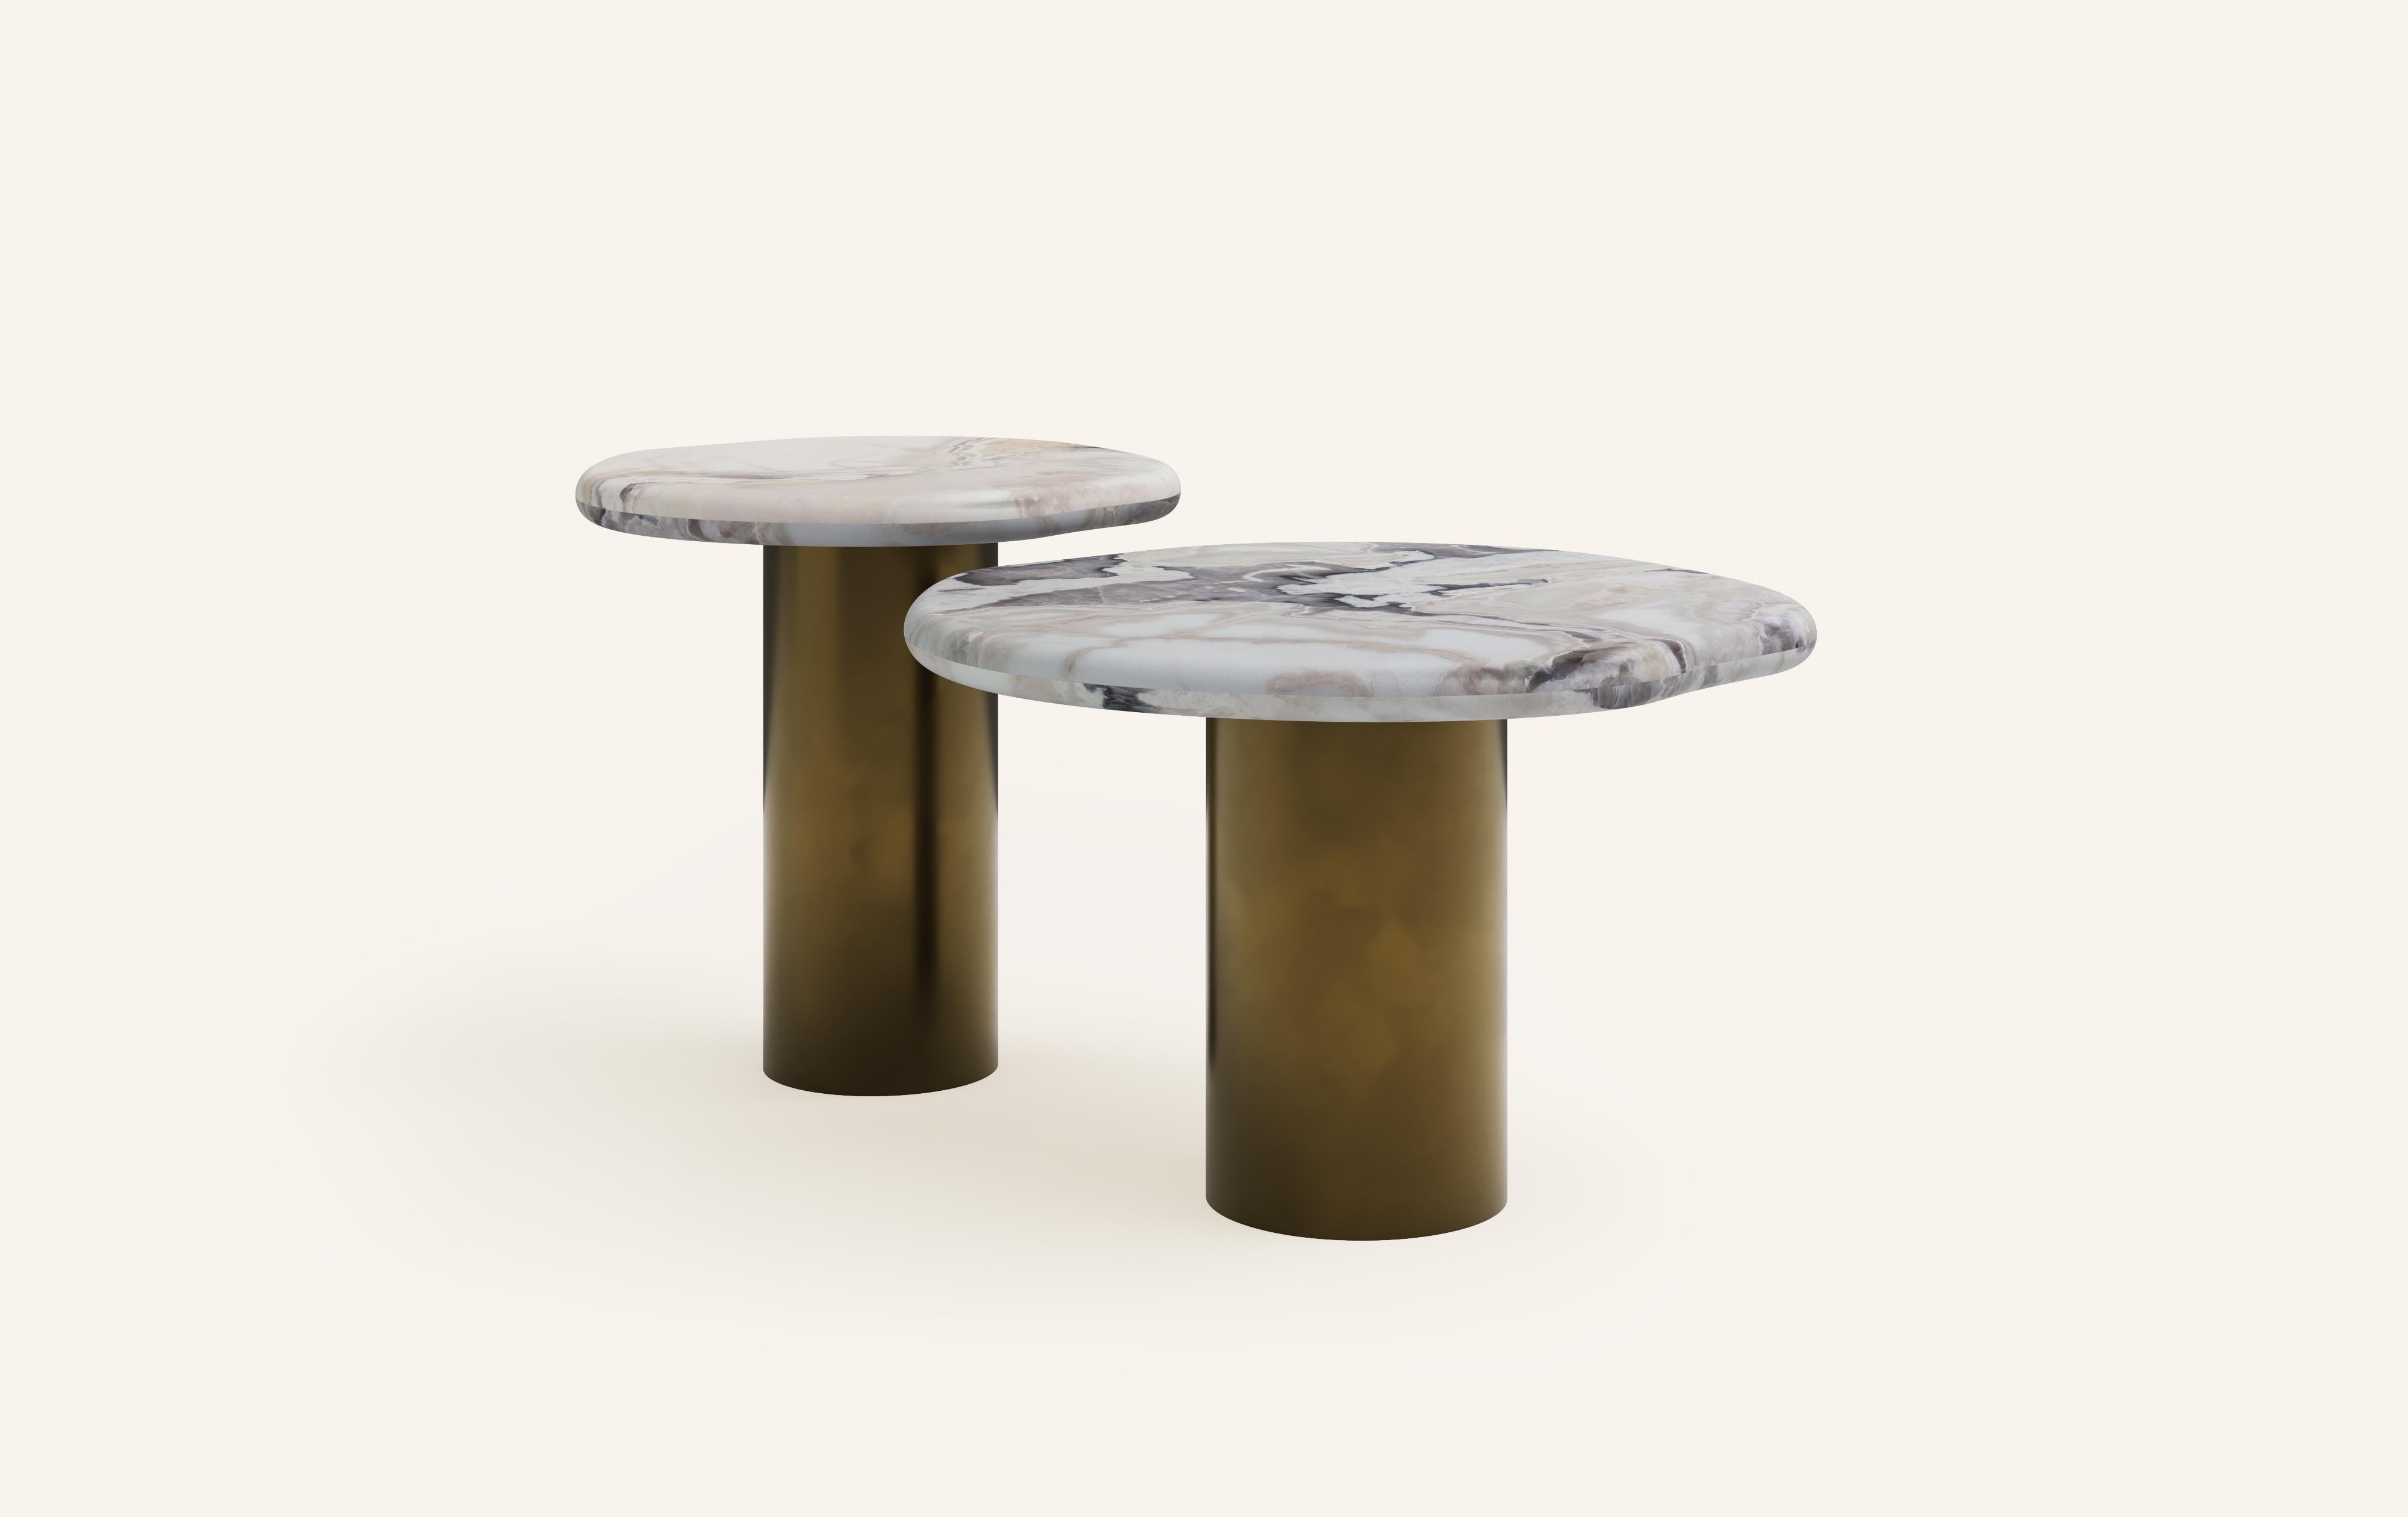 ‘LAGO’, ITALIAN FOR ‘LAKE’, HAS INSPIRED A FORM DERIVED FROM NATURE, TEXTURED WITH LUXURIOUS STONES AND METALS. THE COLLECTION ENCOURAGES NESTING AND LAYERING IN ITS AVAILABLE FORMS.

DIMENSIONS: (SIDE TABLES SOLD INDIVIDUALLY): 
24”L x 24”W x 16”H: